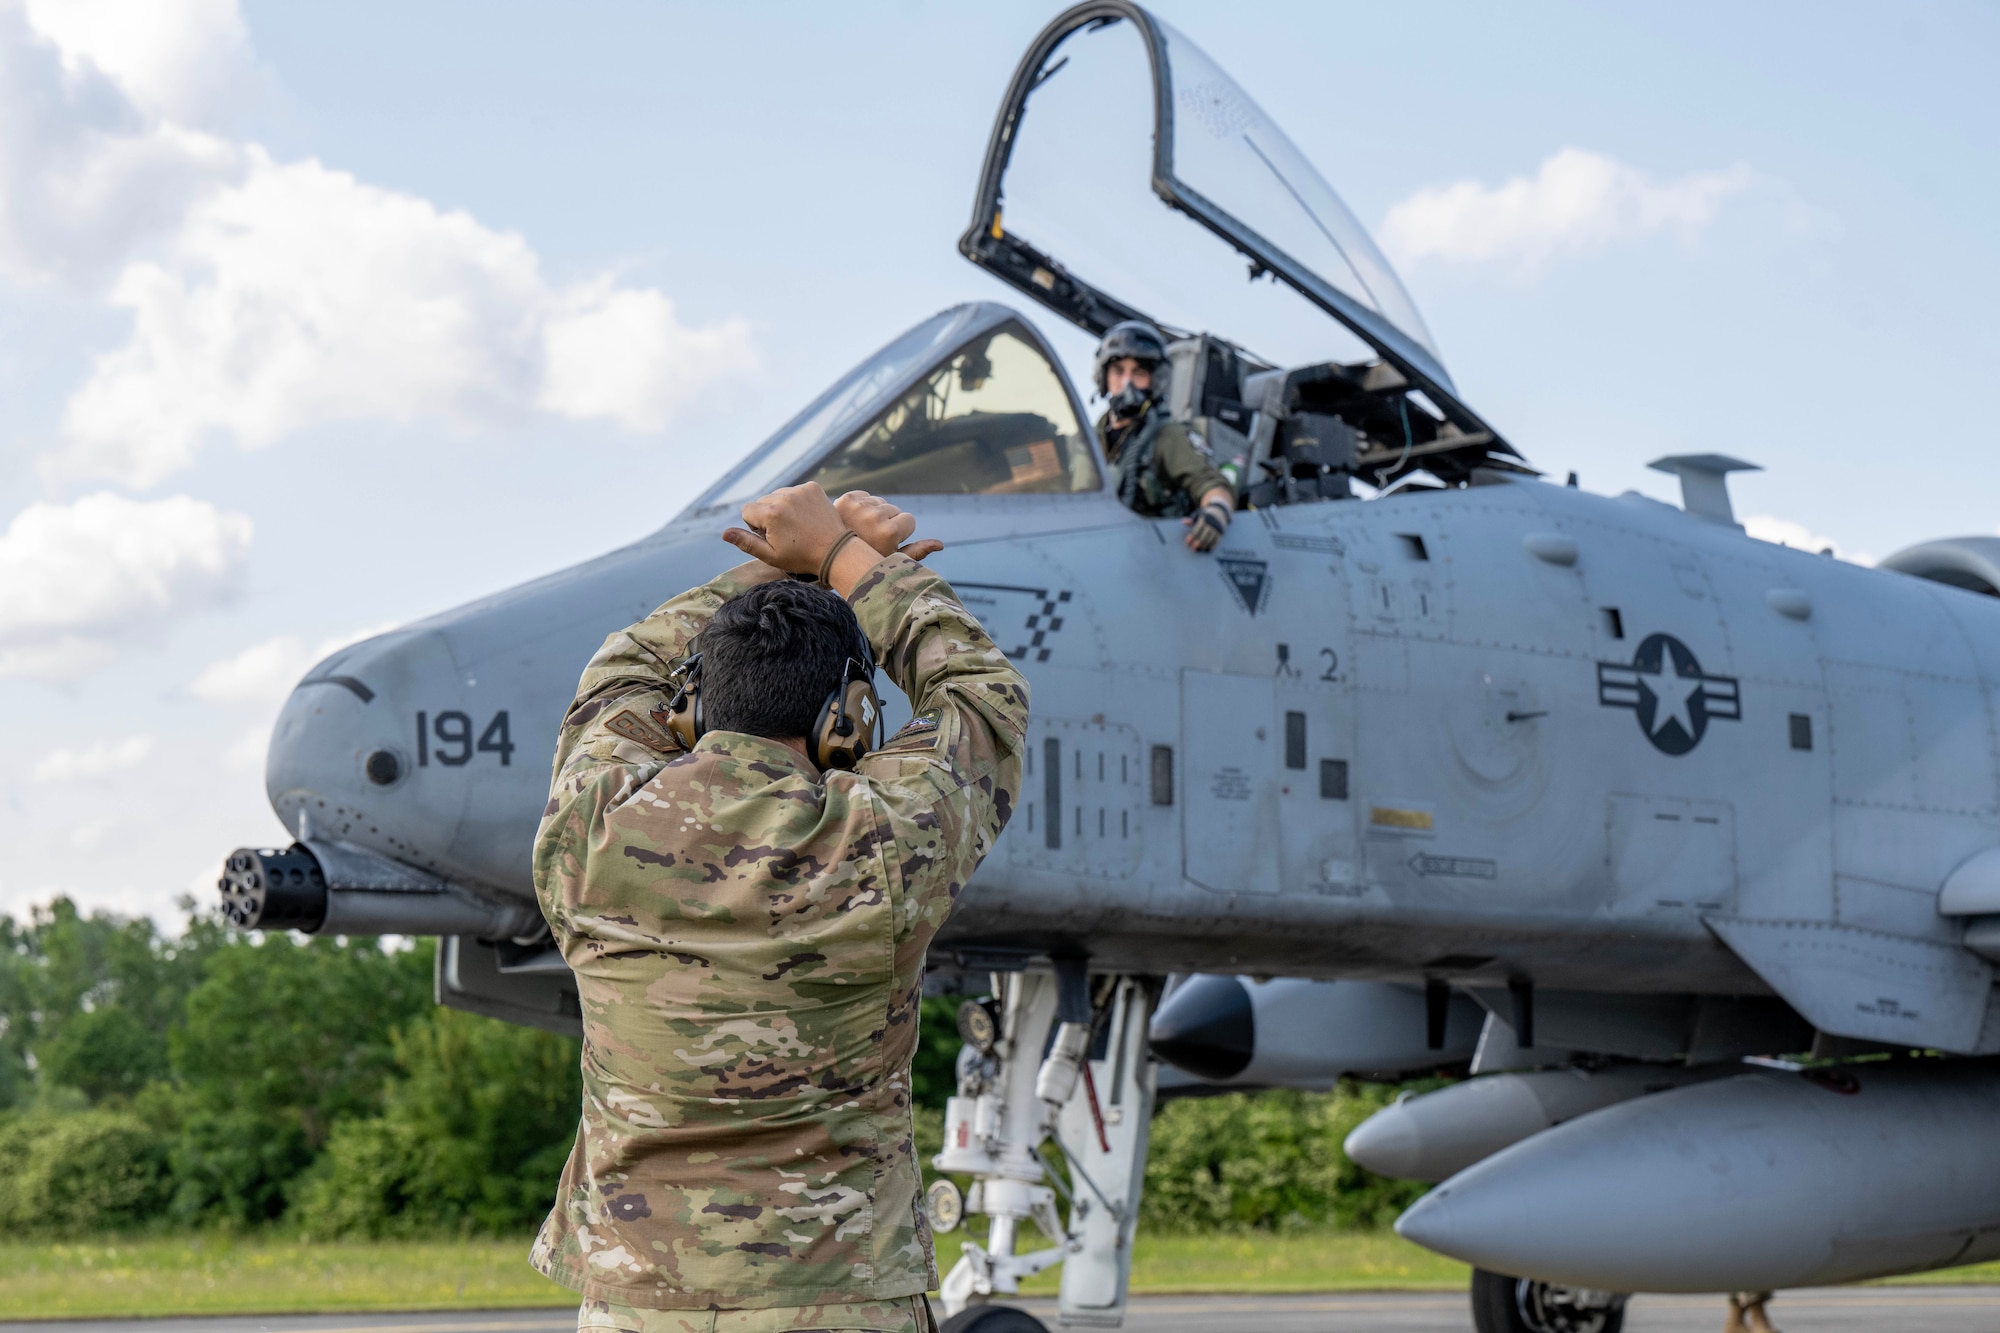 A U.S. Air Force pilot assigned to the 190th Fighter Squadron, 124th Fighter Squadron, Idaho National Guard, taxis his  A-10 Thunderbolt II onto Lechfeld Air Base, Germany in preparation for exercise Air Defender 2023 (AD23), June 6, 2023.  Exercise AD23 integrates both U.S. and allied air-power to defend shared values, while leveraging and strengthening vital partnerships to deter aggression around the world. (U.S. Air National Guard photo by Staff Sgt. Joseph R. Morgan)